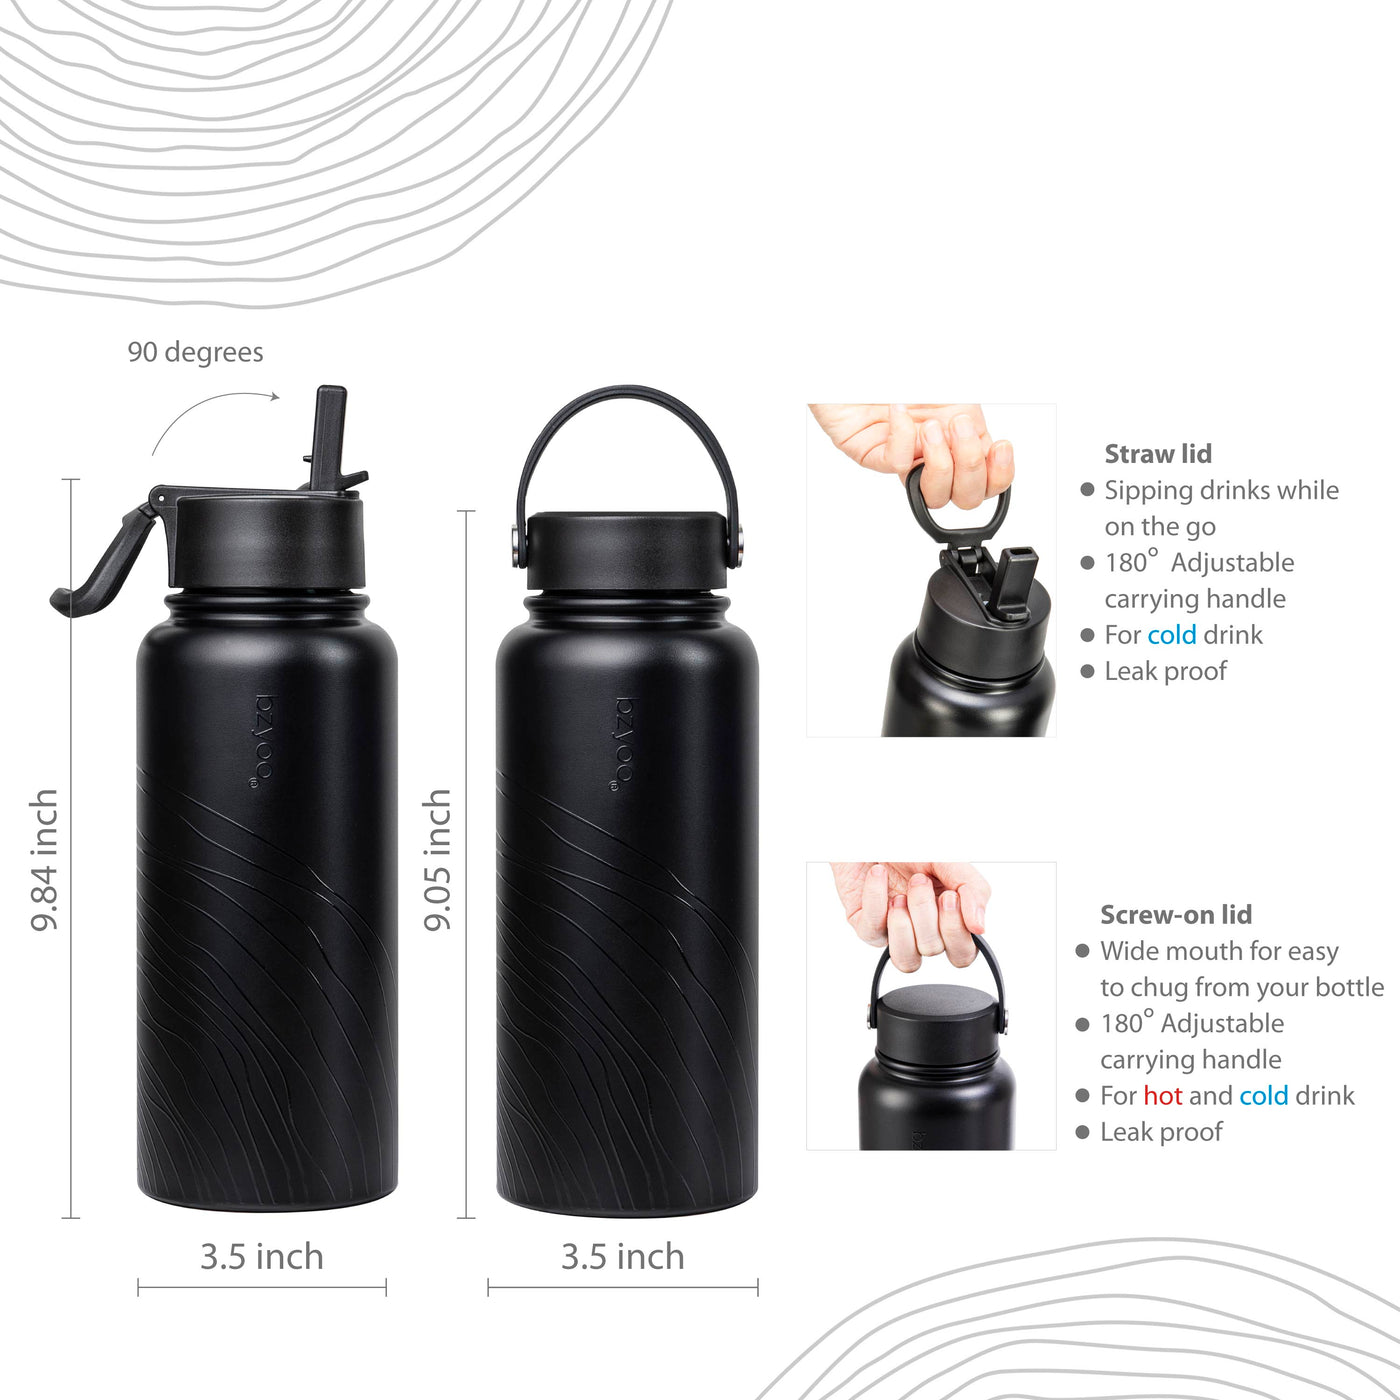 32oz HyDuo Insulated Stainless Steel Double Wall Water Bottle w/ 2 Lids - Organica Black